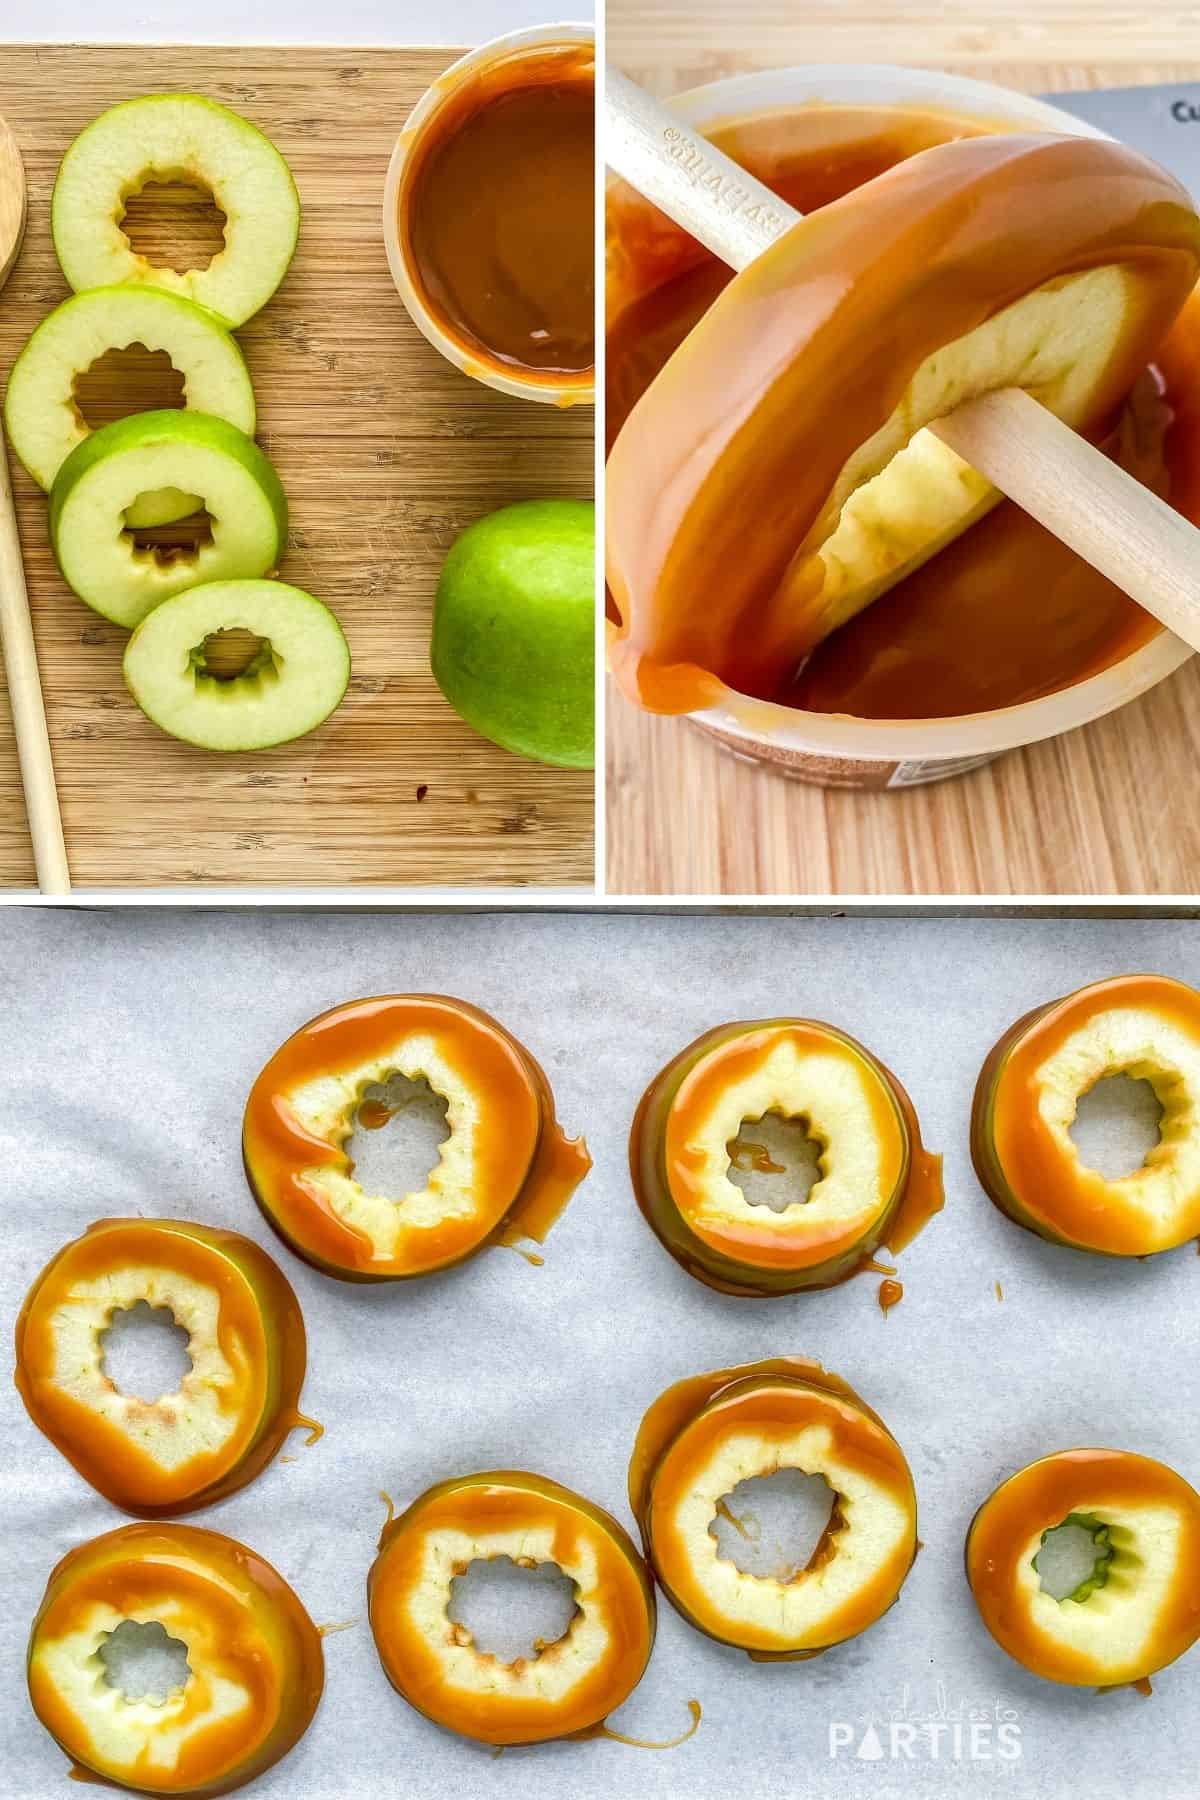 How to Make Fried Apple Rings with Caramel